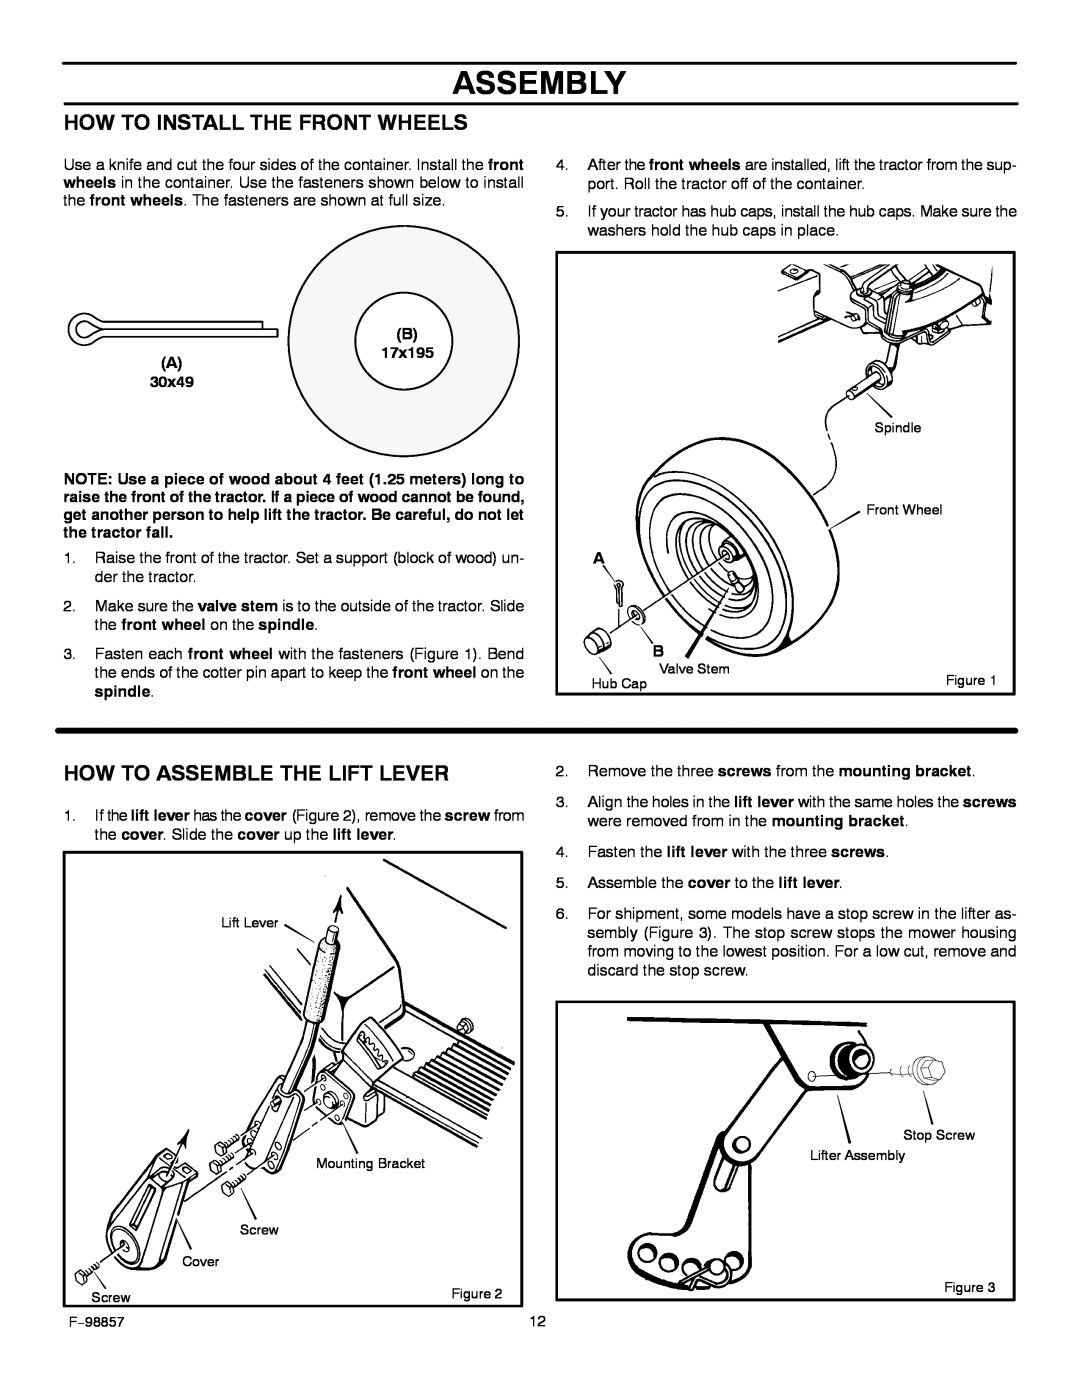 Hayter Mowers 30-Dec manual How To Install The Front Wheels, How To Assemble The Lift Lever, Assembly, B A17x195 